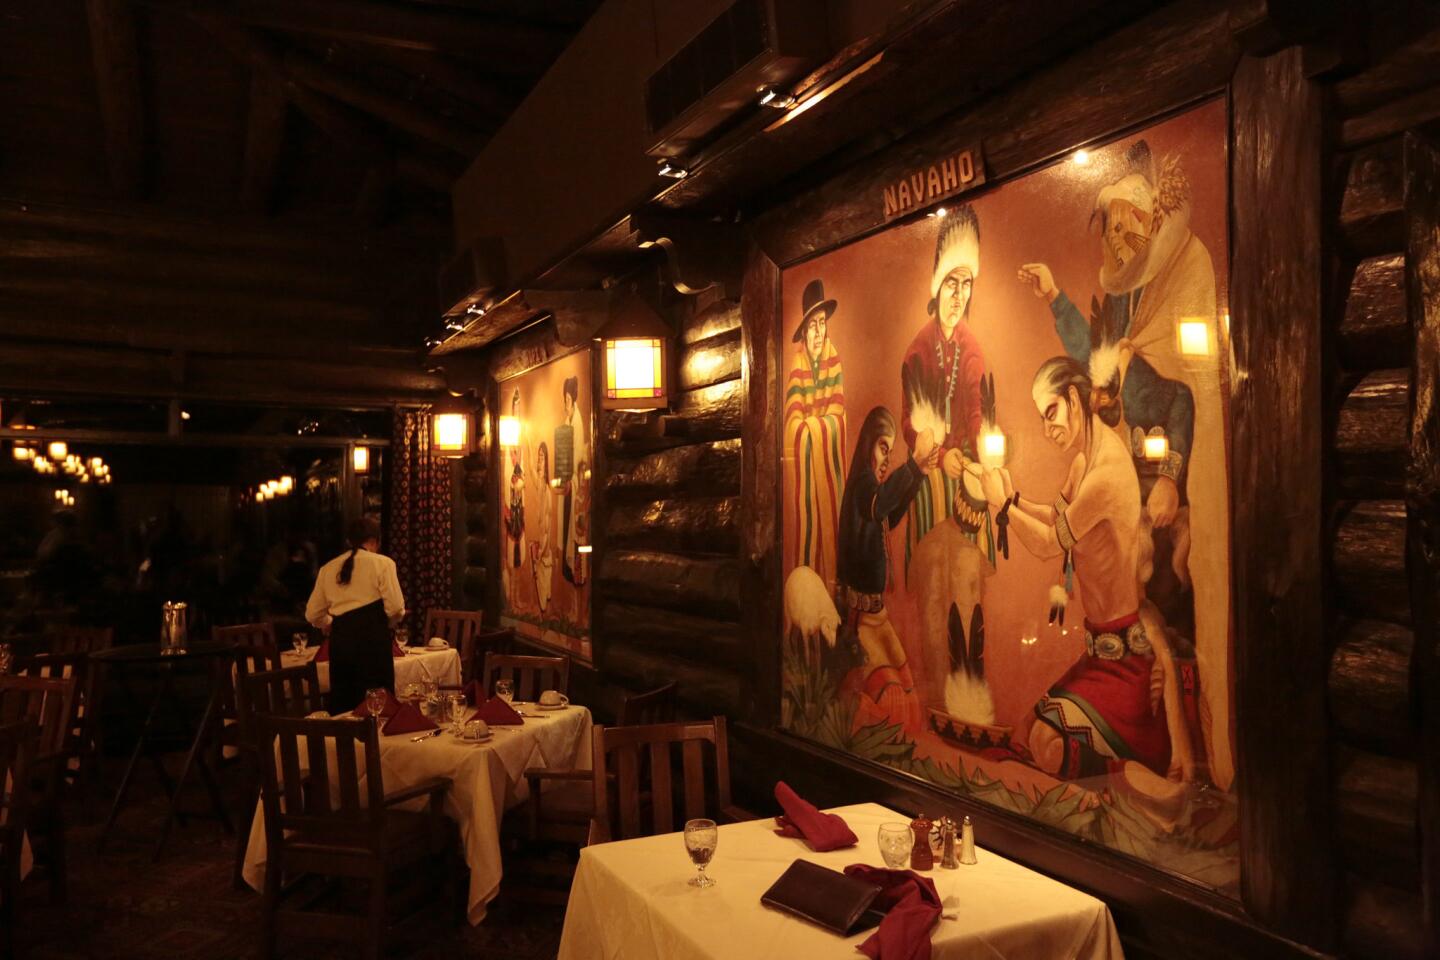 The dining room of the El Tovar Hotel is decorated with depictions of Native American culture.